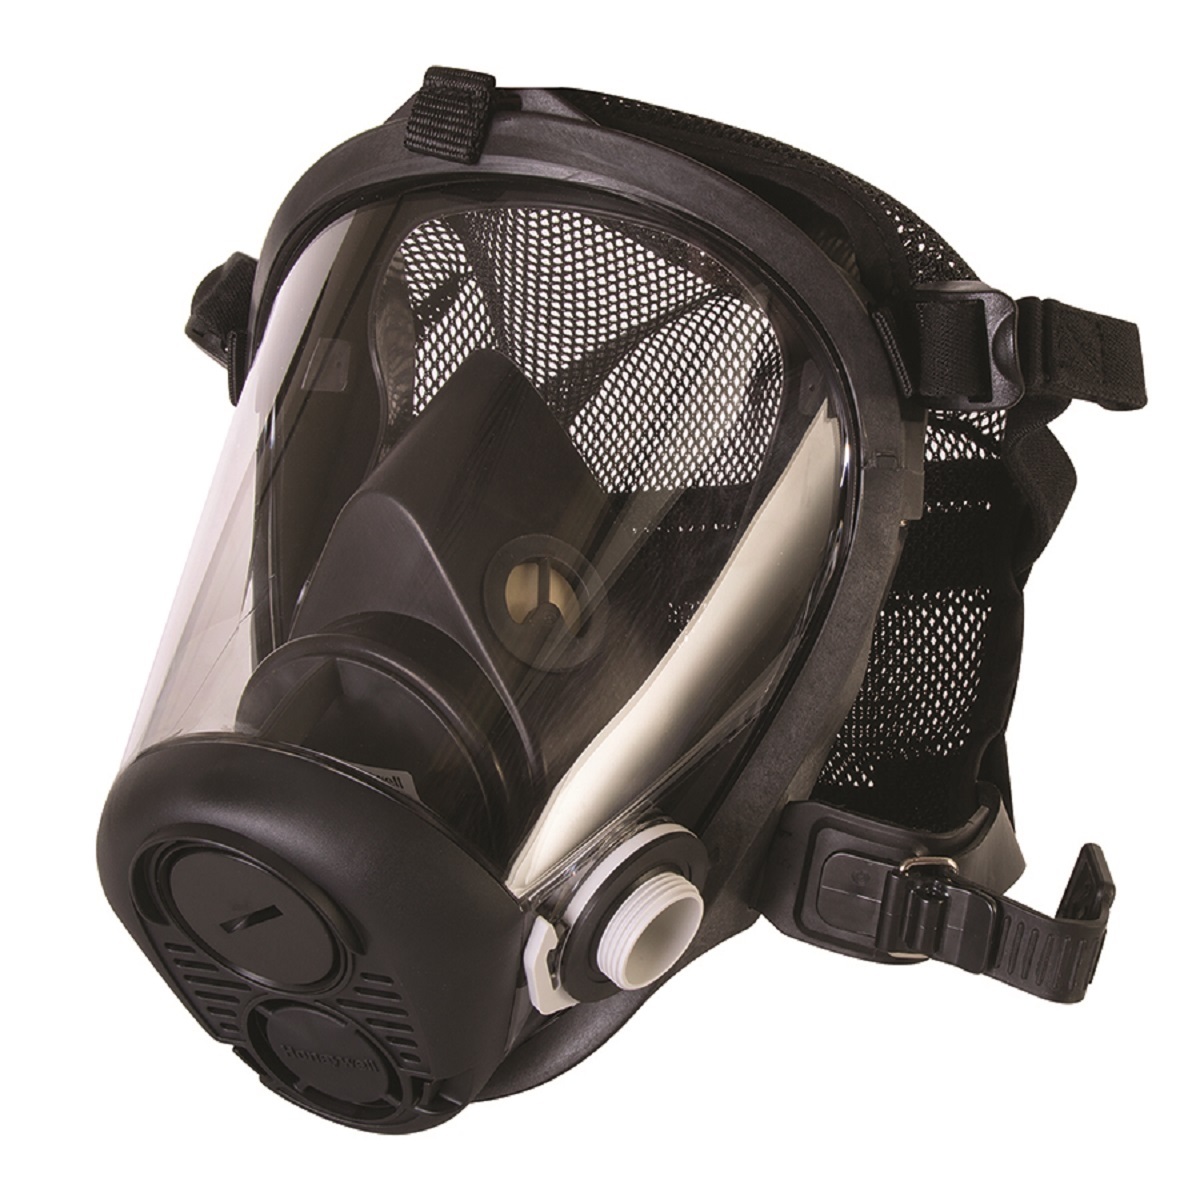 Honeywell Large RU6500 Series Full Face Silicone Air Purifying Respirator With Mesh Headnet (Availability restrictions apply.)